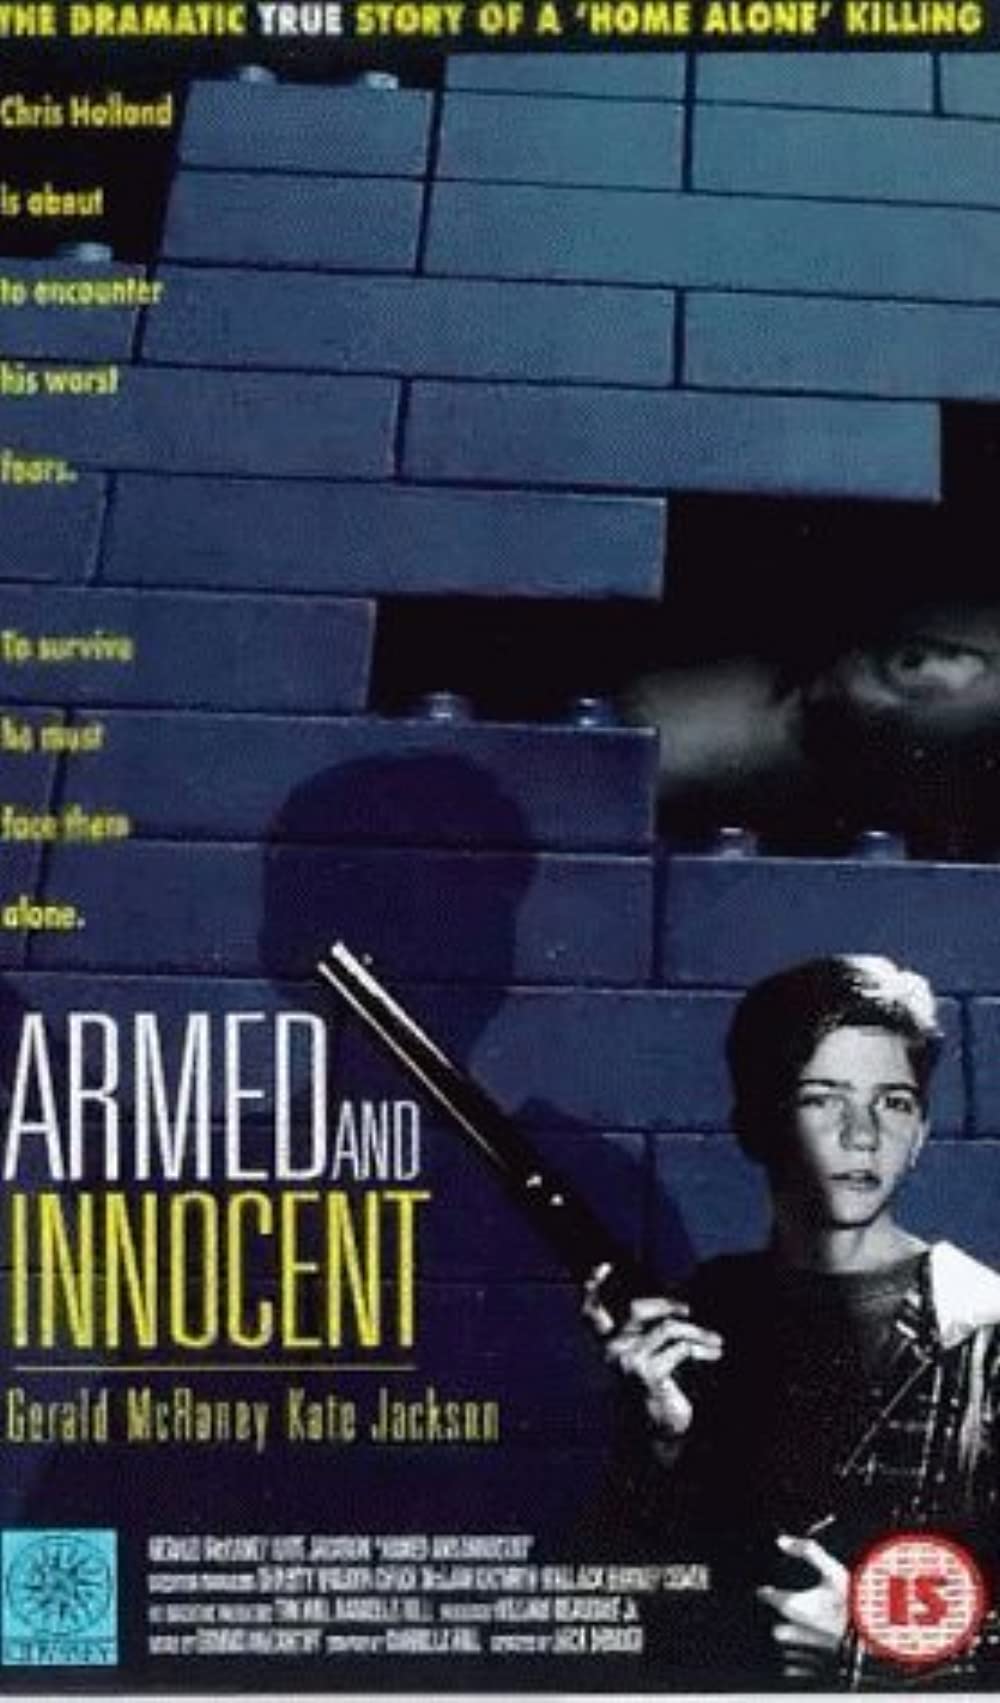 Armed And Innocent Dvd (1994)